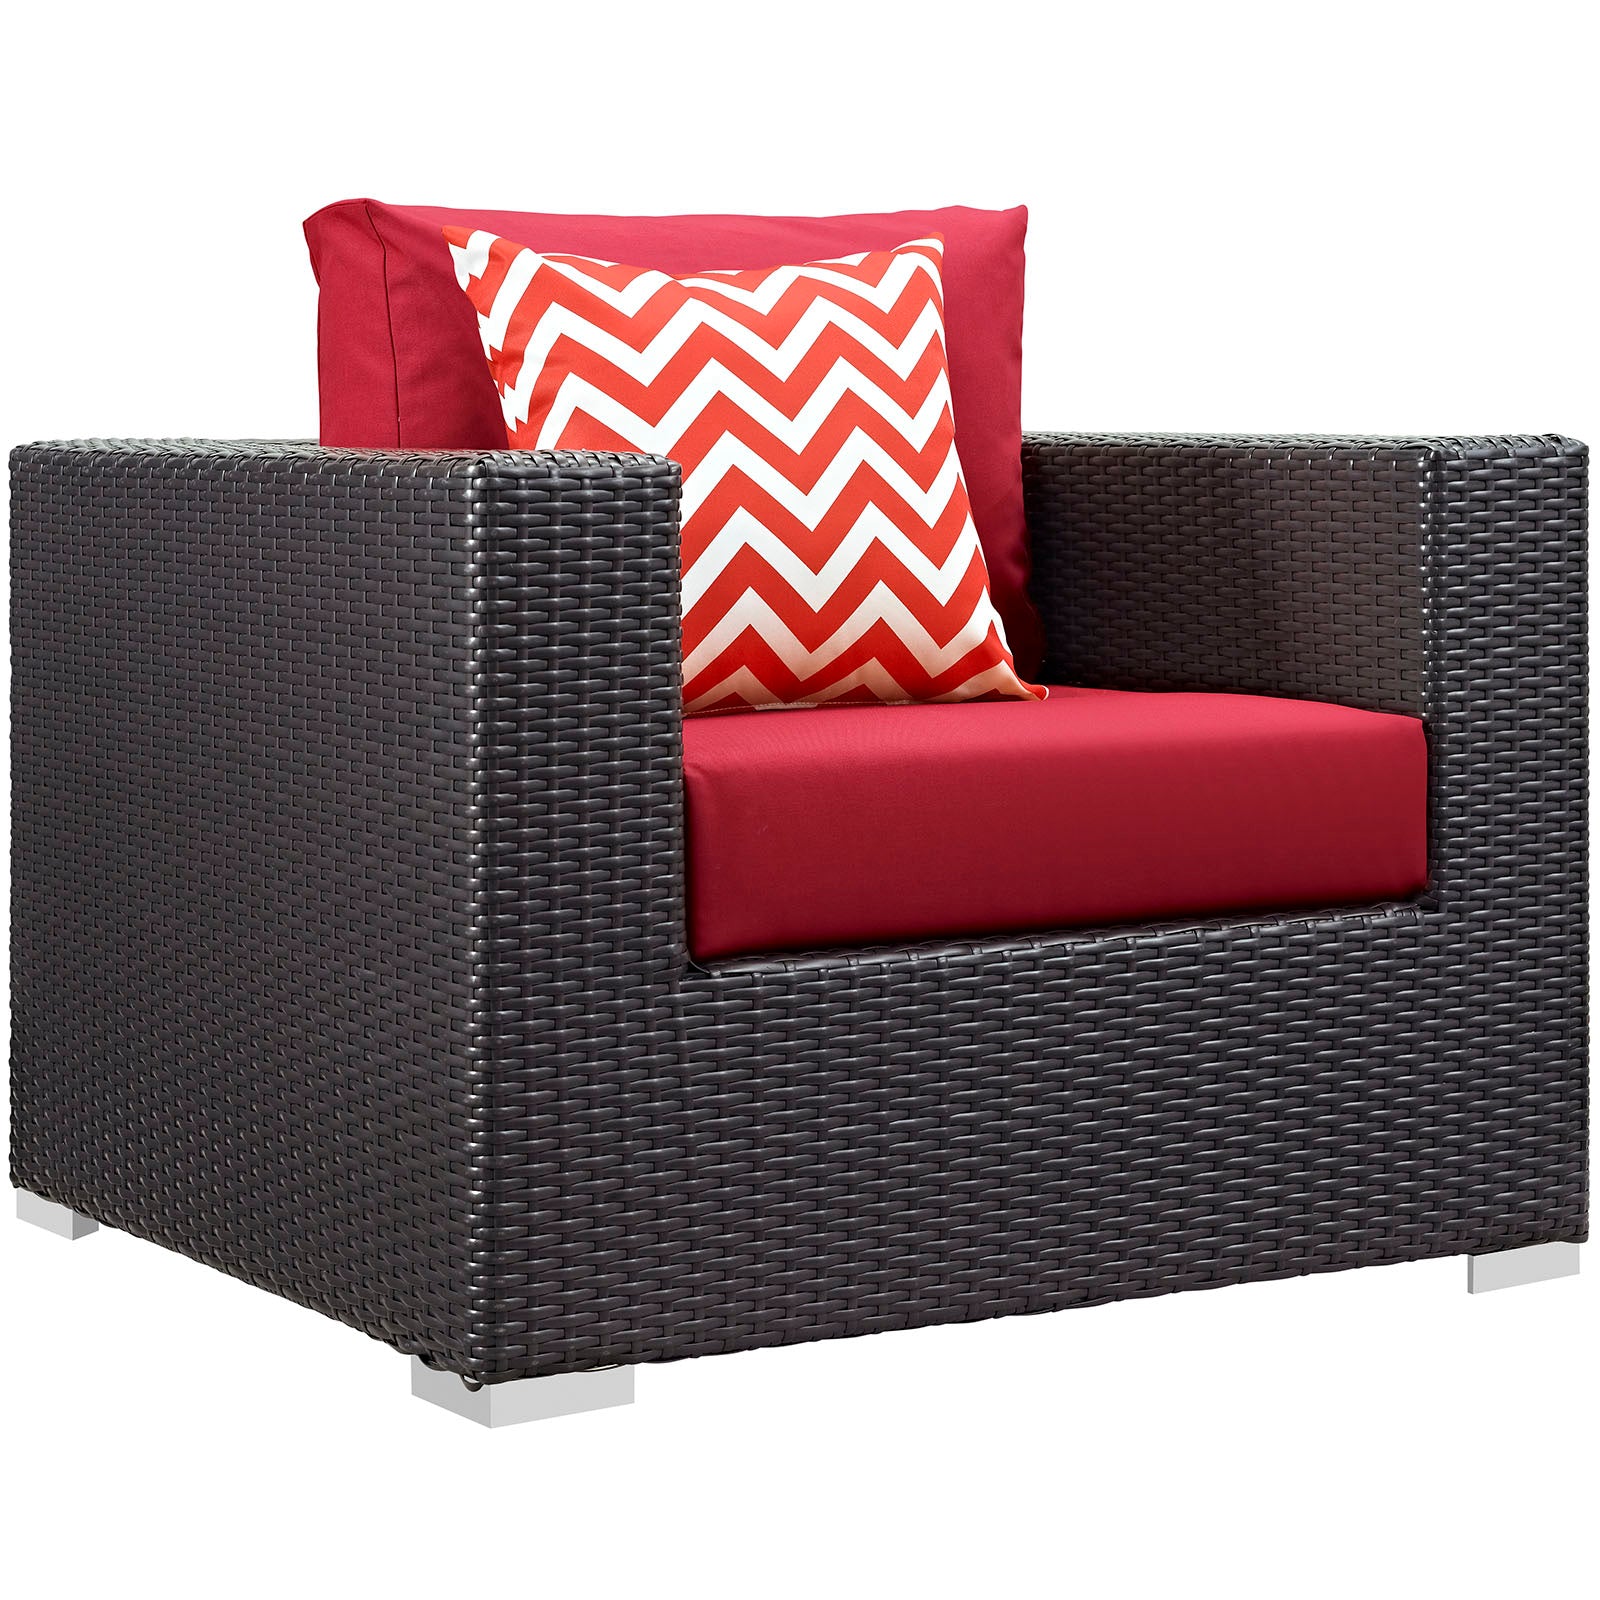 Modway Outdoor Conversation Sets - Convene 8 Piece Outdoor Patio Sectional Set in Espresso Red